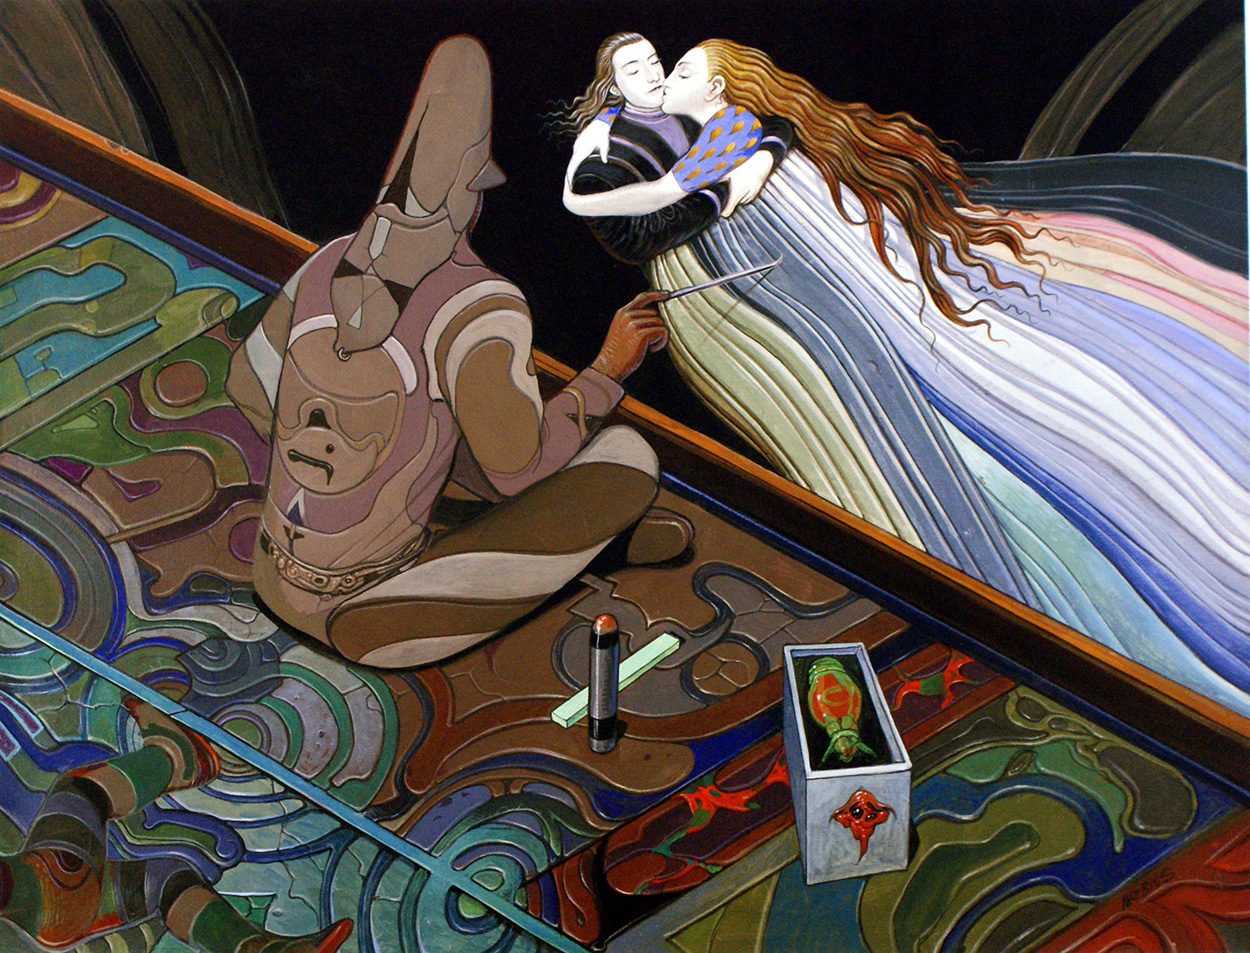 Le Bal des Musiciens (Limited Edition Print) (Signed) art by Moebius (Jean Giraud) Art at The Illustration Art Gallery